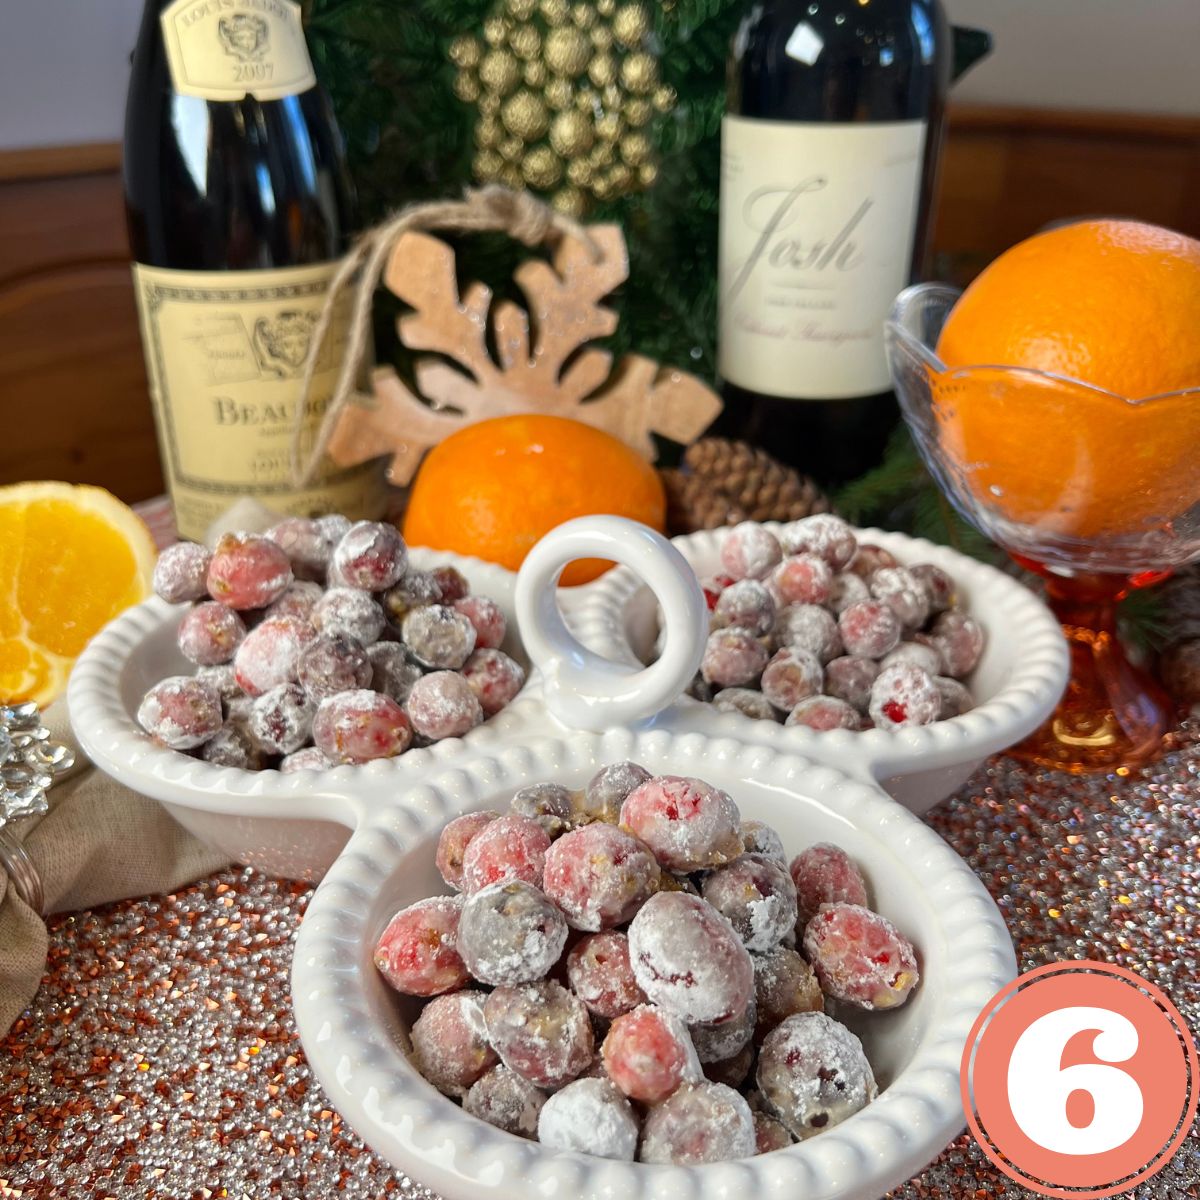 Candied cranberries in a tripe white serving tray on a table with 2 bottles of red wine and 2 oranges